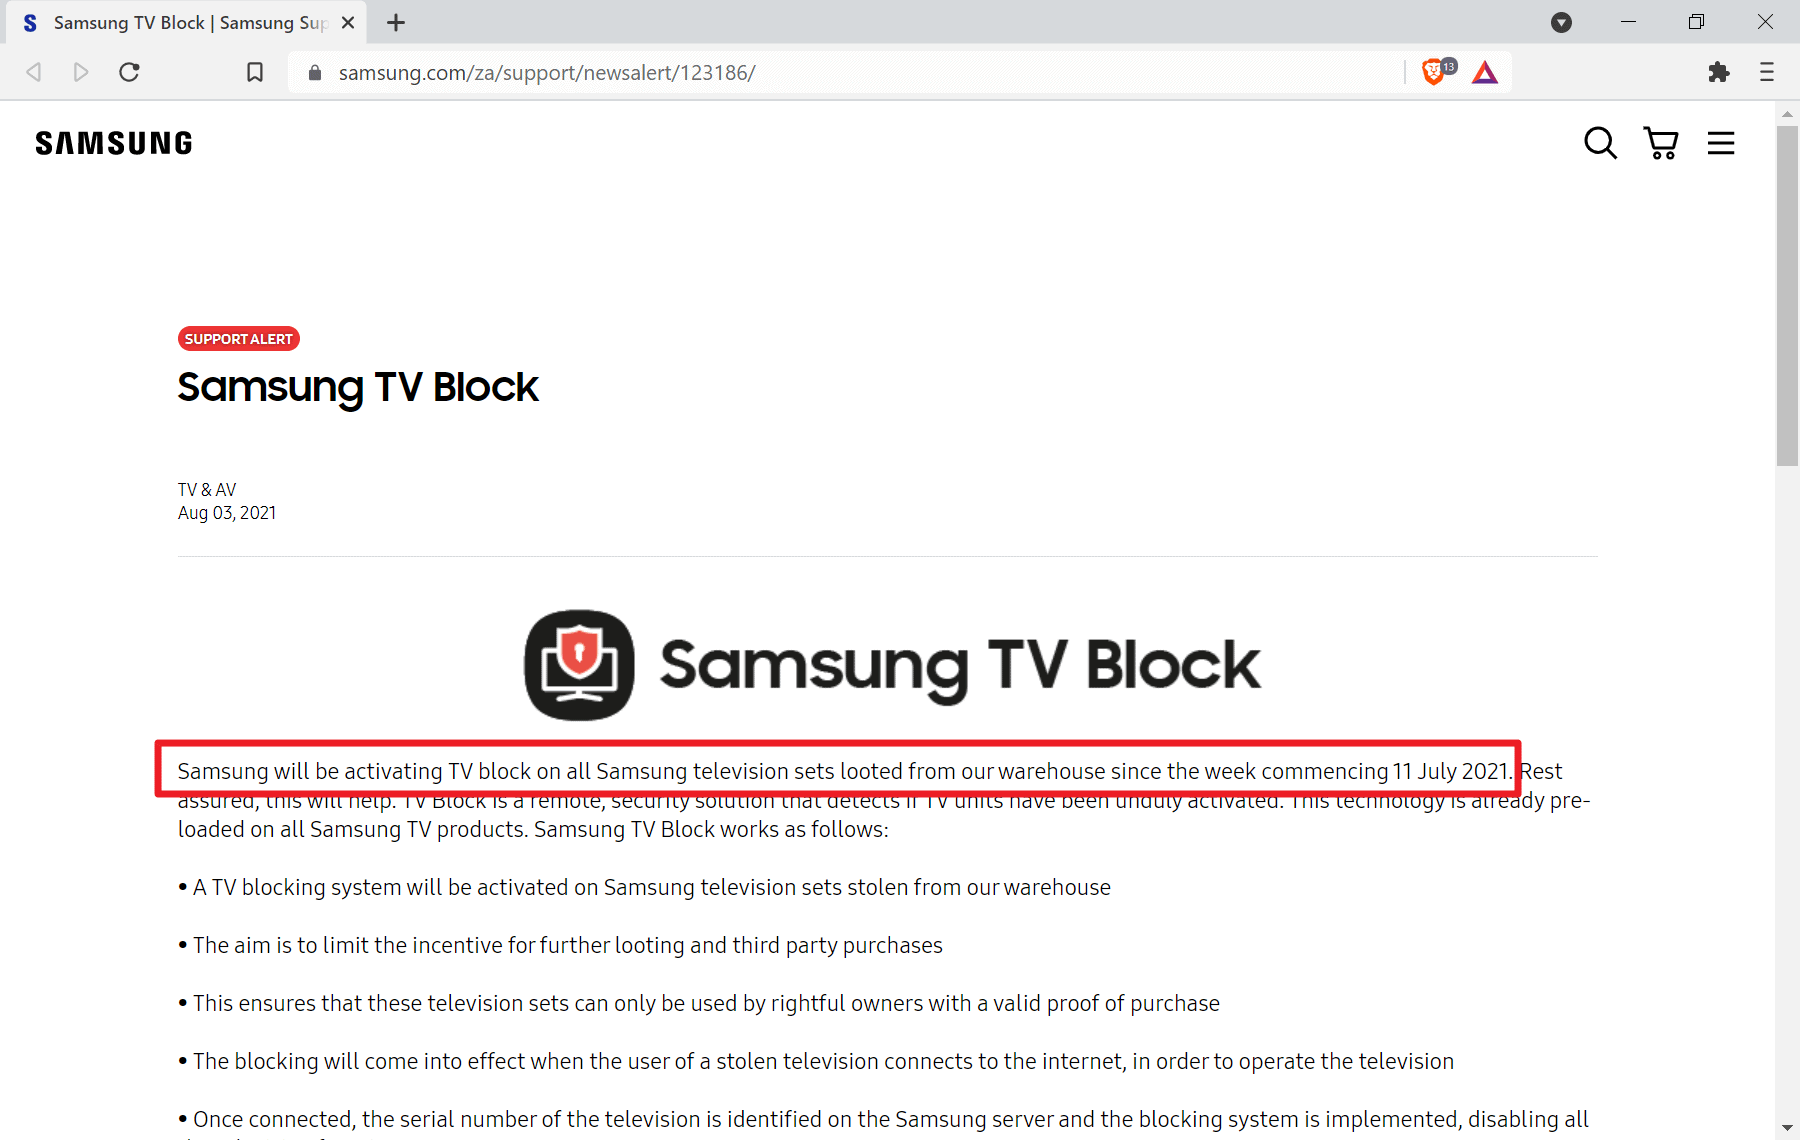 Samsung can disable its TVs using Kill Switch functionality